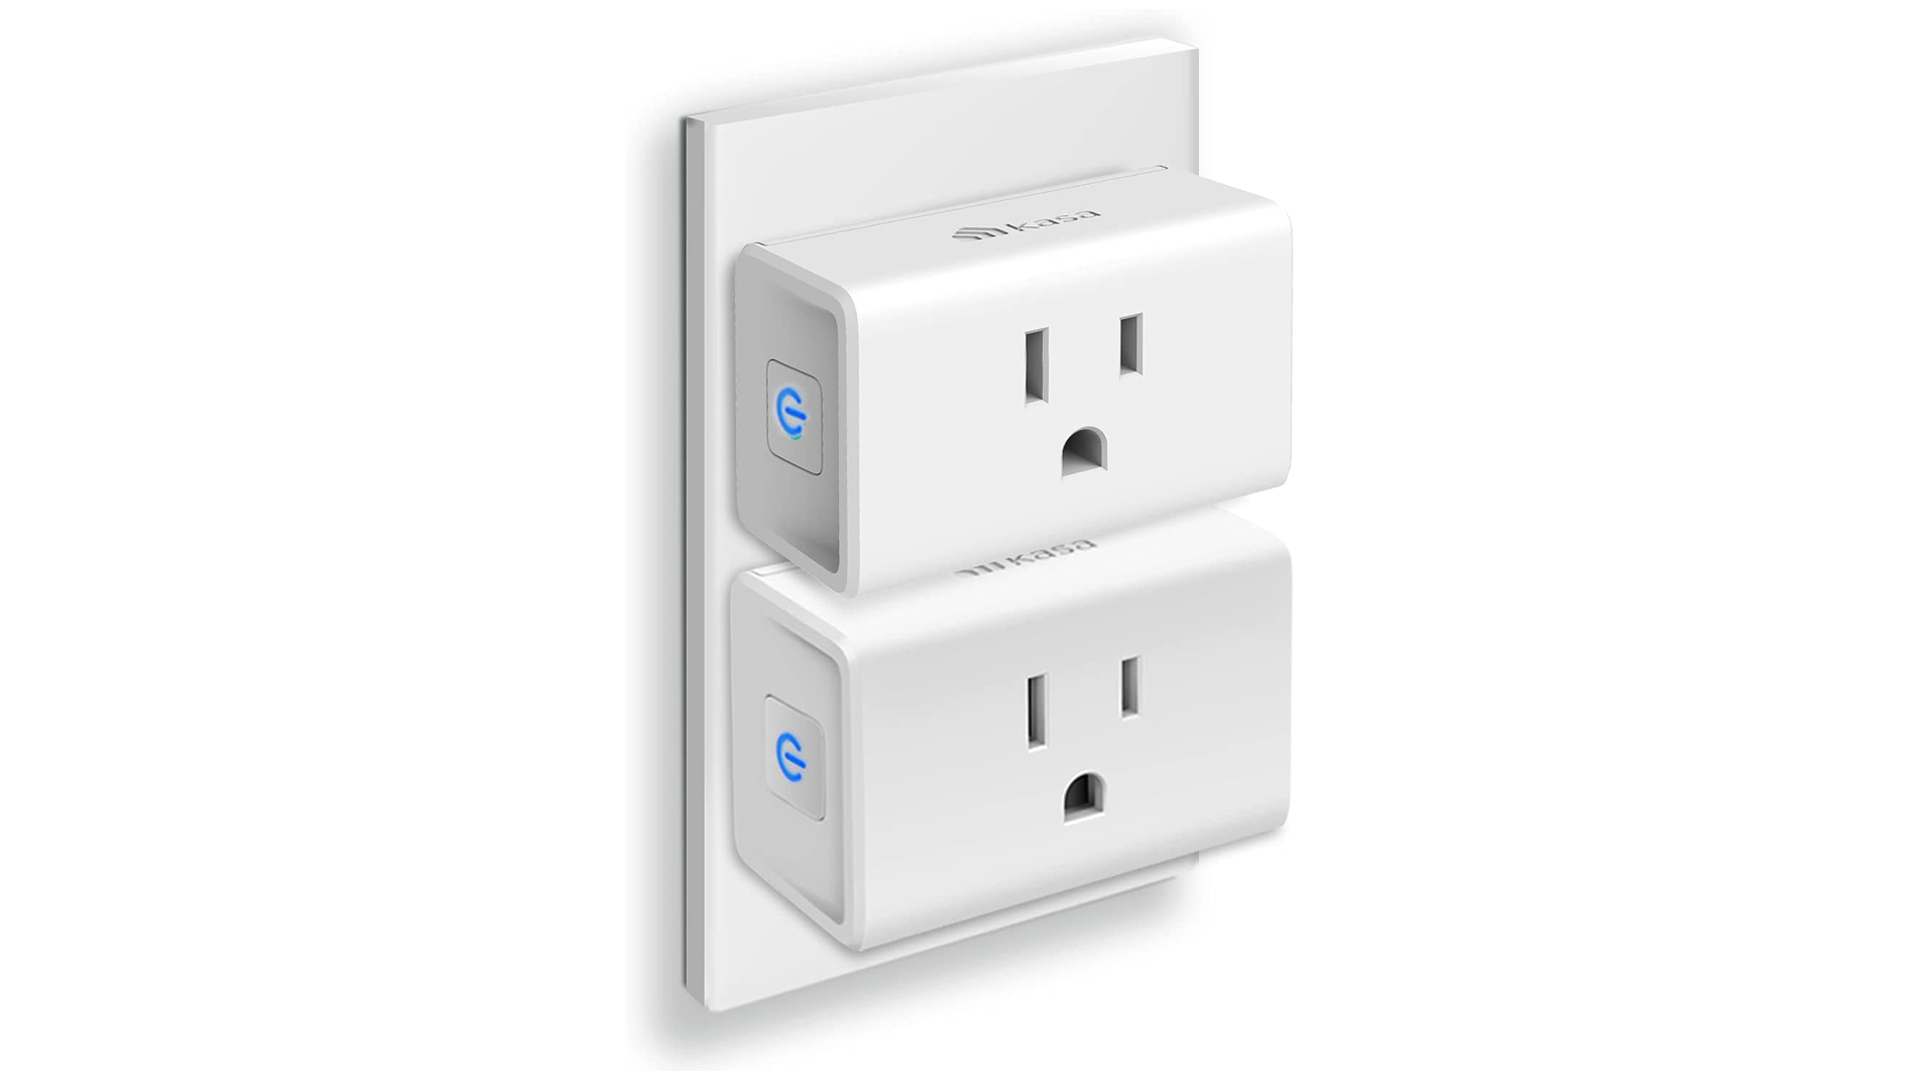 Two Kasa Smart Plug Ultra Minis in a wall outlet